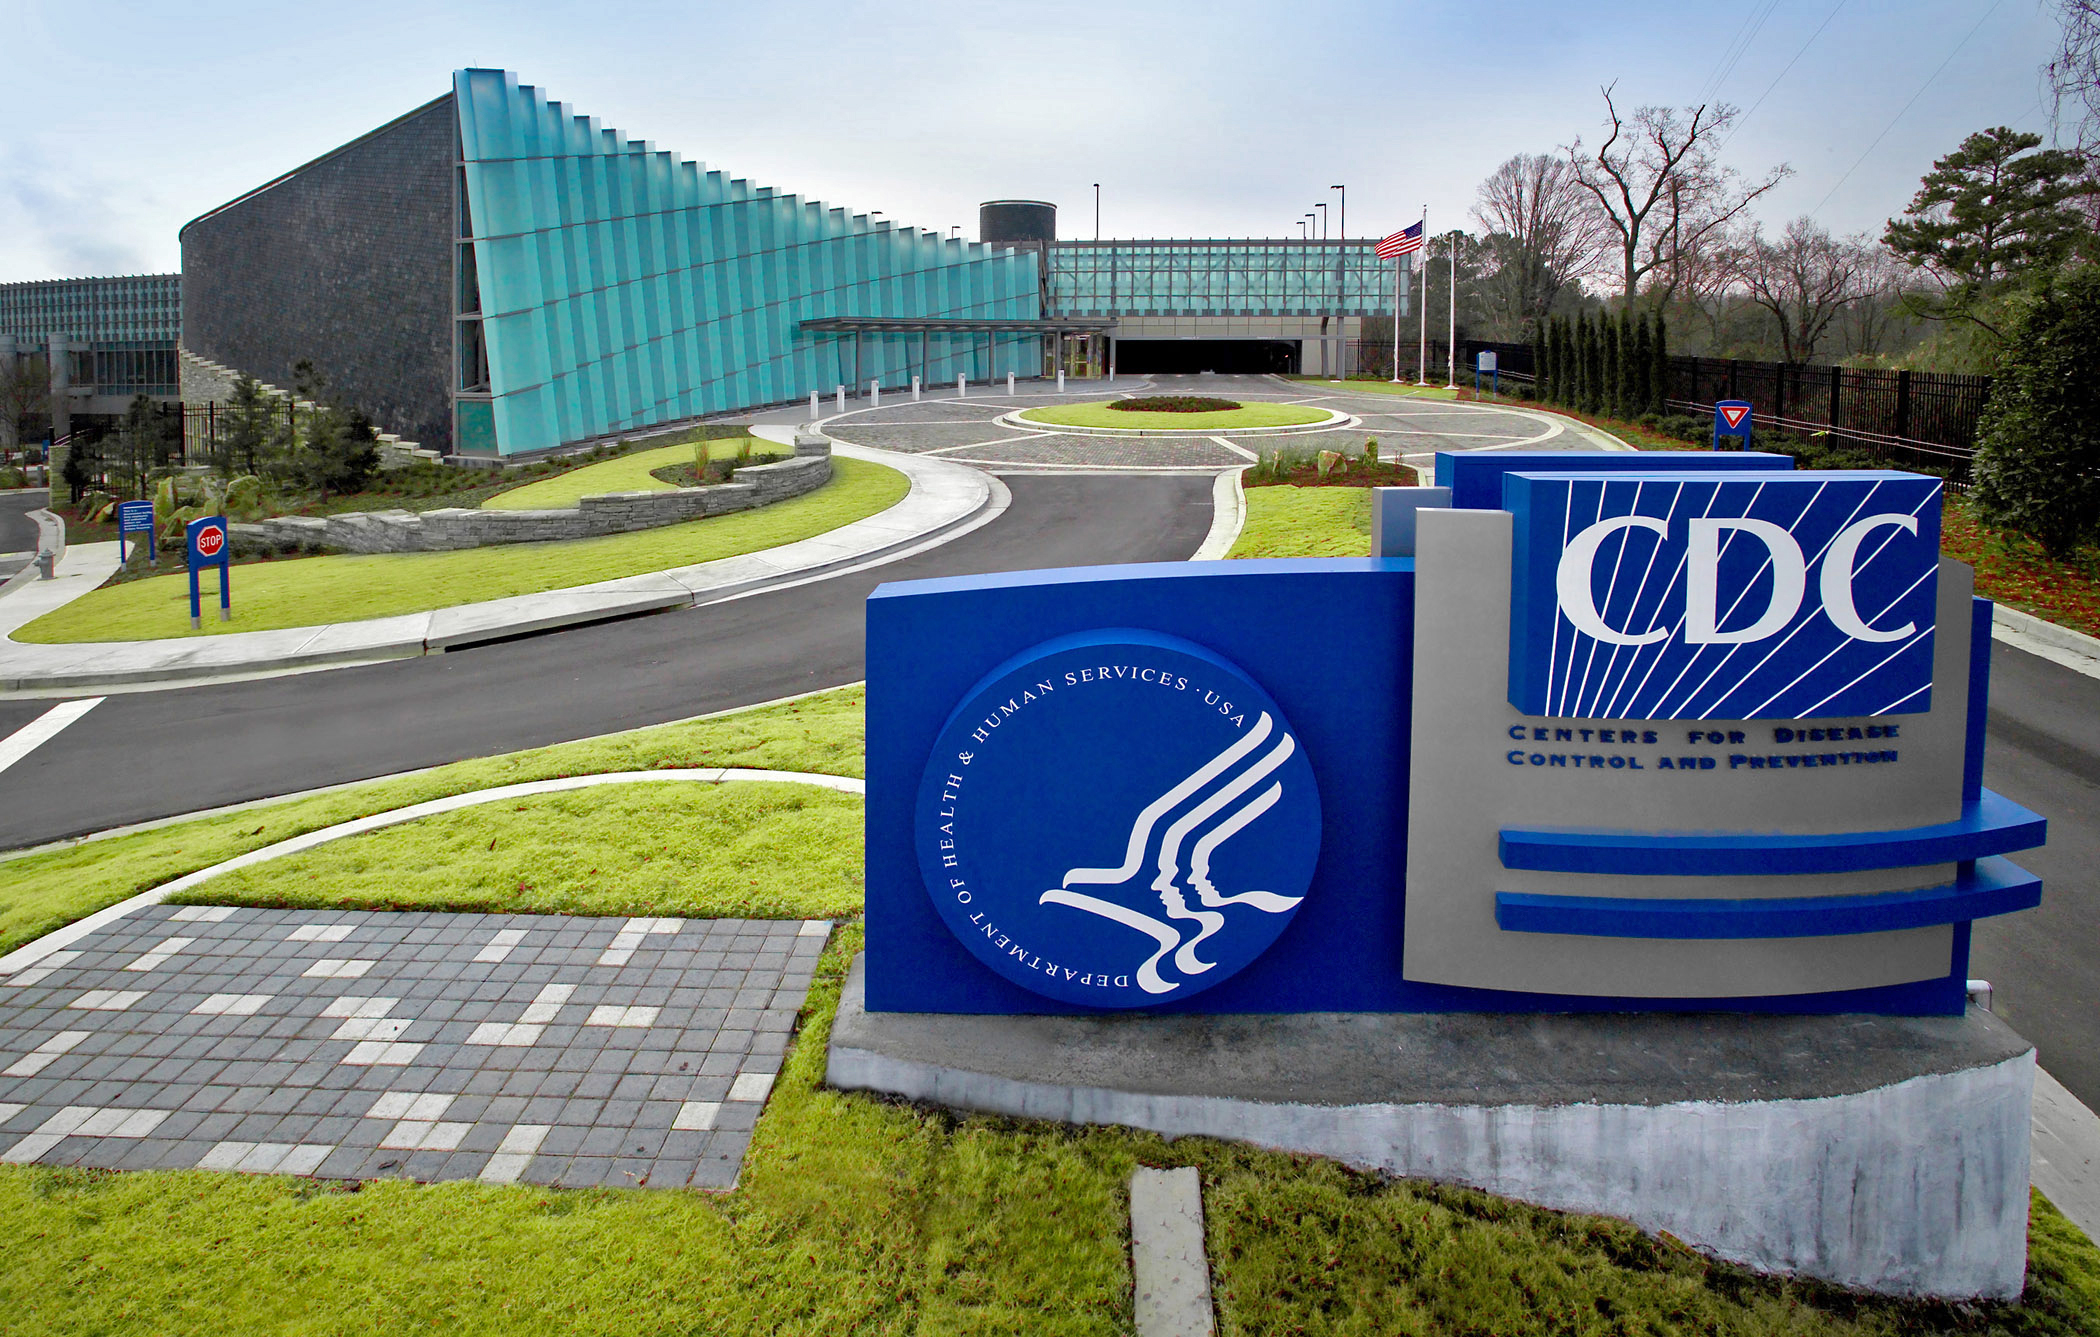 PHOTO: Centers for Disease Control campus